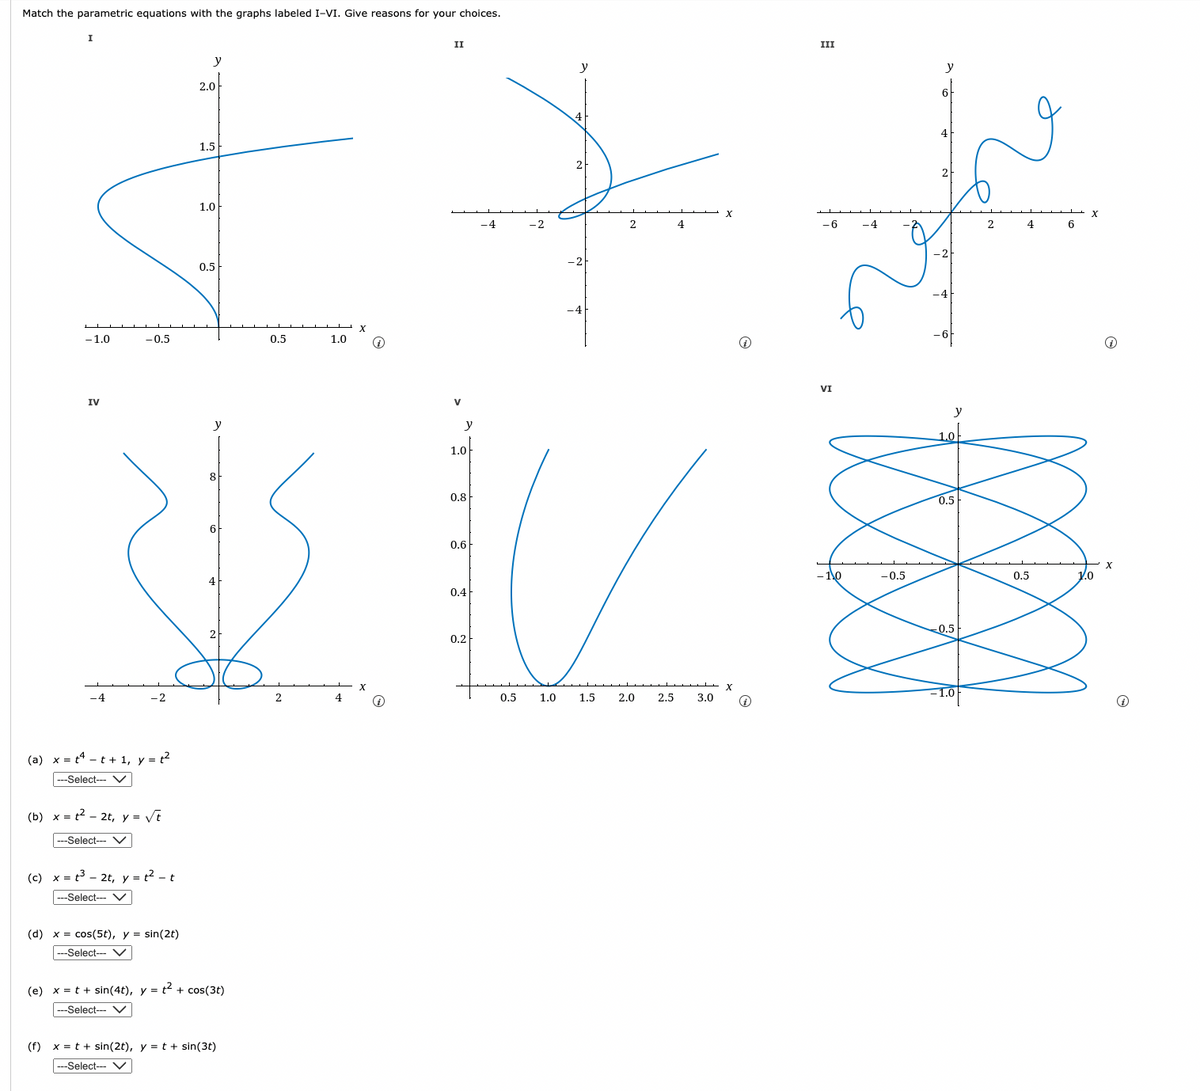 Match the parametric equations with the graphs labeled I-VI. Give reasons for your choices.
(a)
I
- 1.0
y
y
y
2.0
1.5
← + +
1.0
X
X
2
4
-6
-4
2
4
6
0.5
IV
(f)
-0.5
x = t4 t + 1, y = 2²2²
---Select--- V
(b) x = t²2t, y = √t
---Select-- V
(c) x = t³ 2t, y = ²-t
-Select-- V
(d) x = cos(5t), y = sin(2t)
---Select--- V
y
8
6
2
(e) x = t + sin(4t), y = t² + cos(3t)
---Select--- V
x = t + sin(2t), y = t + sin(3t)
---Select--- V
0.5
2
1.0
4
X
II
Ⓡi
y
1.0
0.8
0.6
0.4
0.2
K
1.5
0.5
1.0
2.0
2.5 3.0
III
Q
VI
- 10
-0.5
1.0
0.5
-0.5H
0.5
x
↑